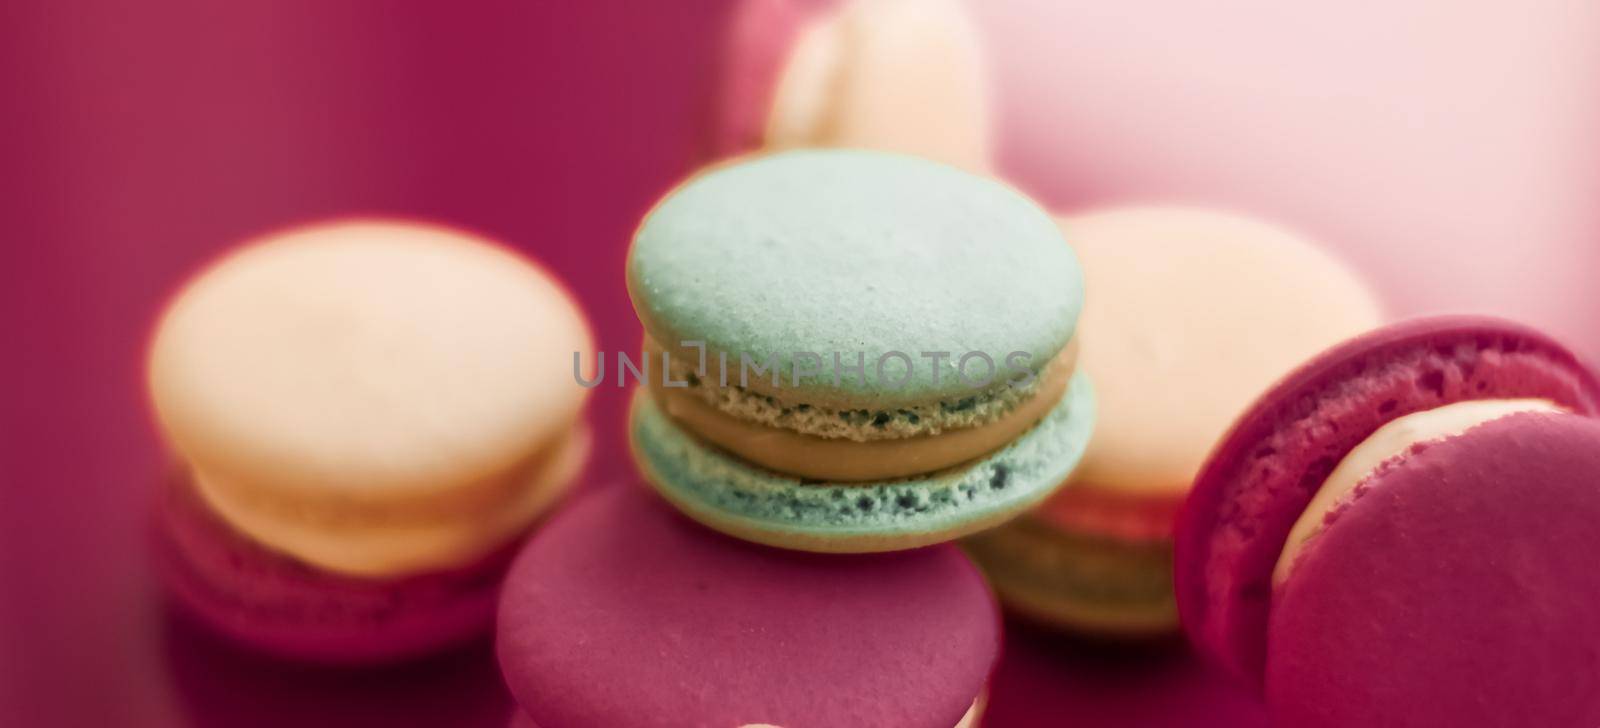 Pastry, bakery and branding concept - French macaroons on cherry pink background, parisian chic cafe dessert, sweet food and cake macaron for luxury confectionery brand, holiday backdrop design